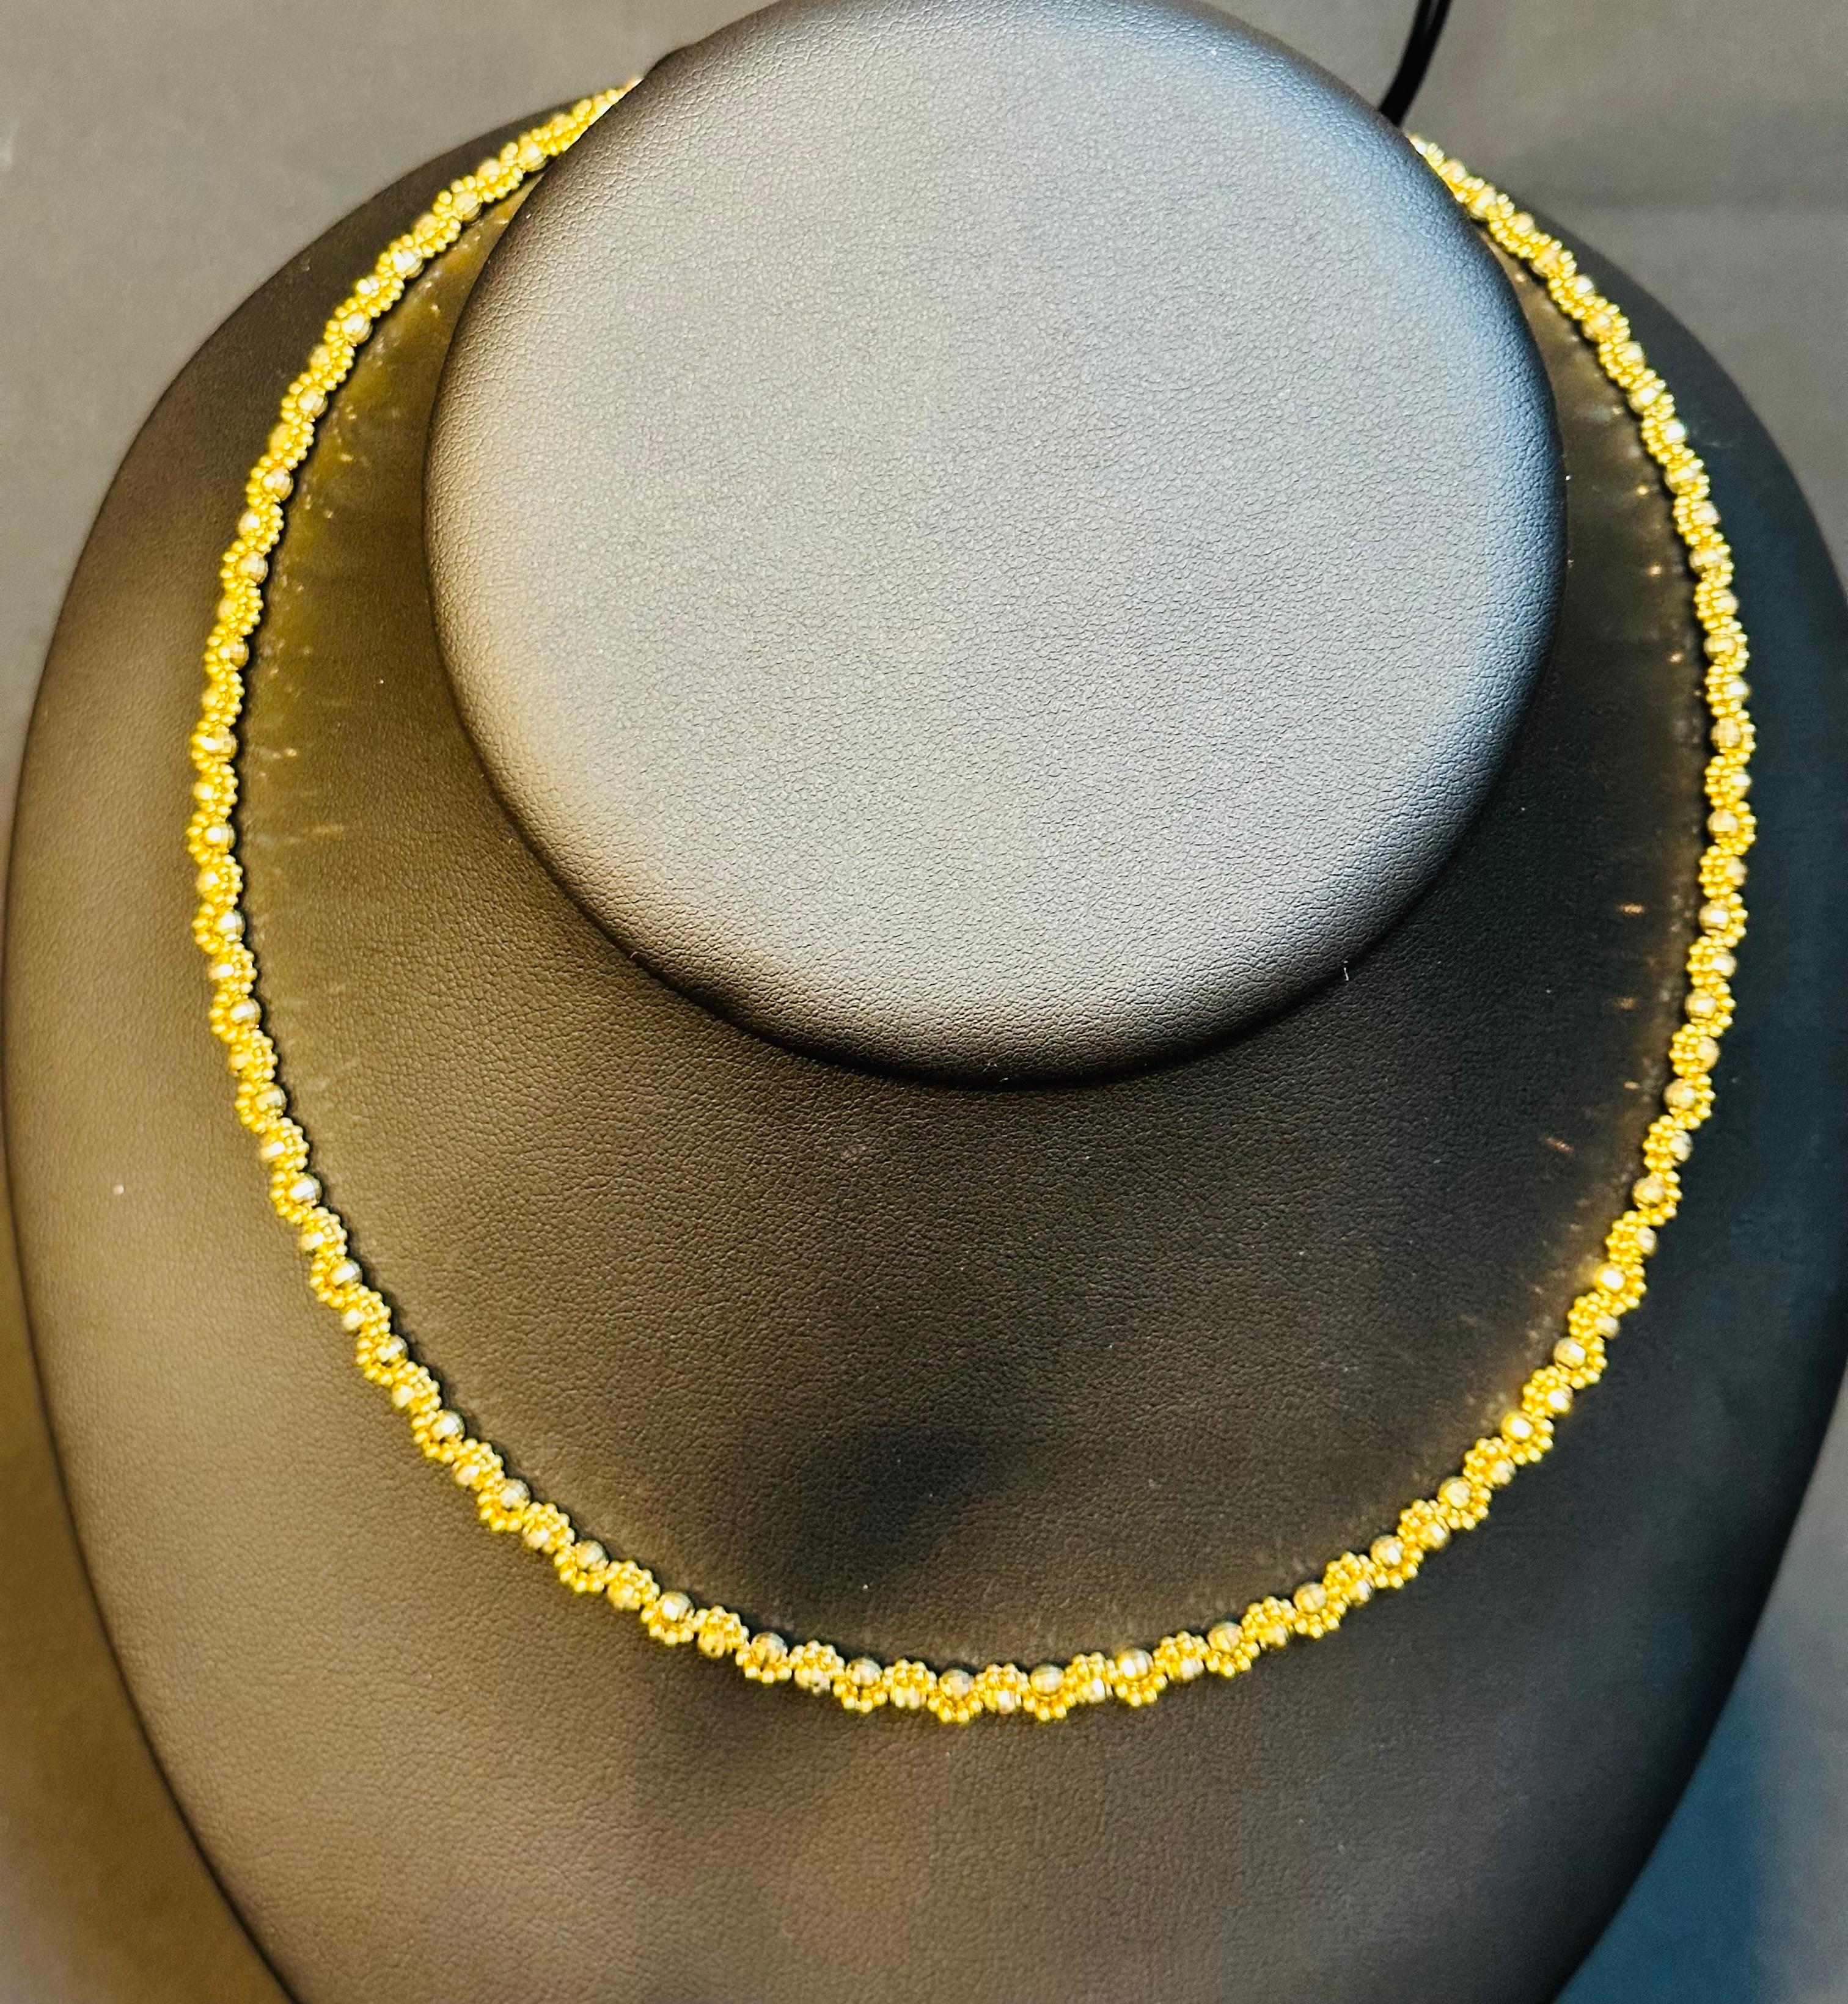 Vintage 14 Karat Yellow Gold 13 Gm, Twisted Chains with Balls in Between 1